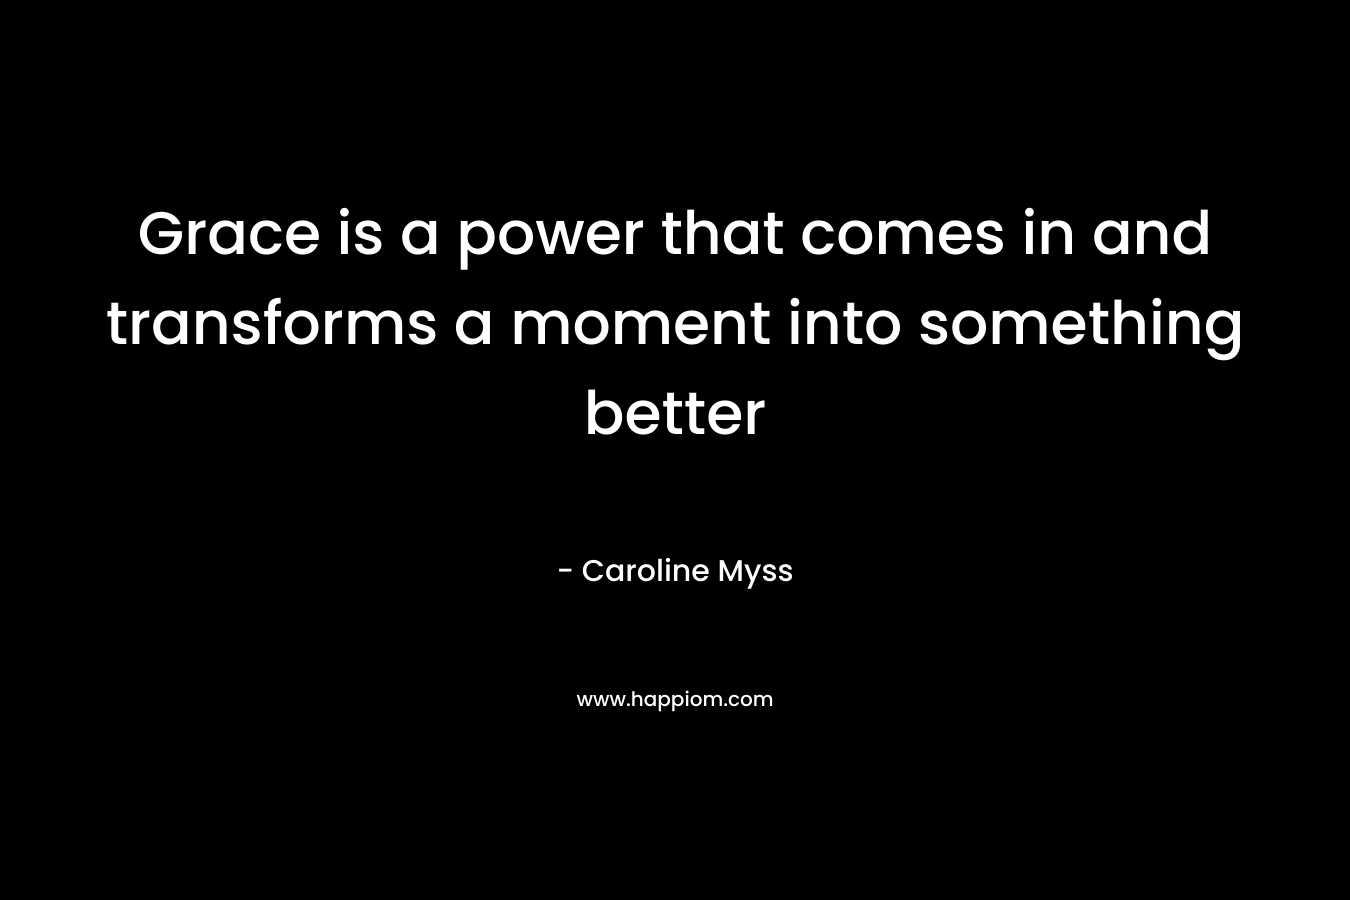 Grace is a power that comes in and transforms a moment into something better